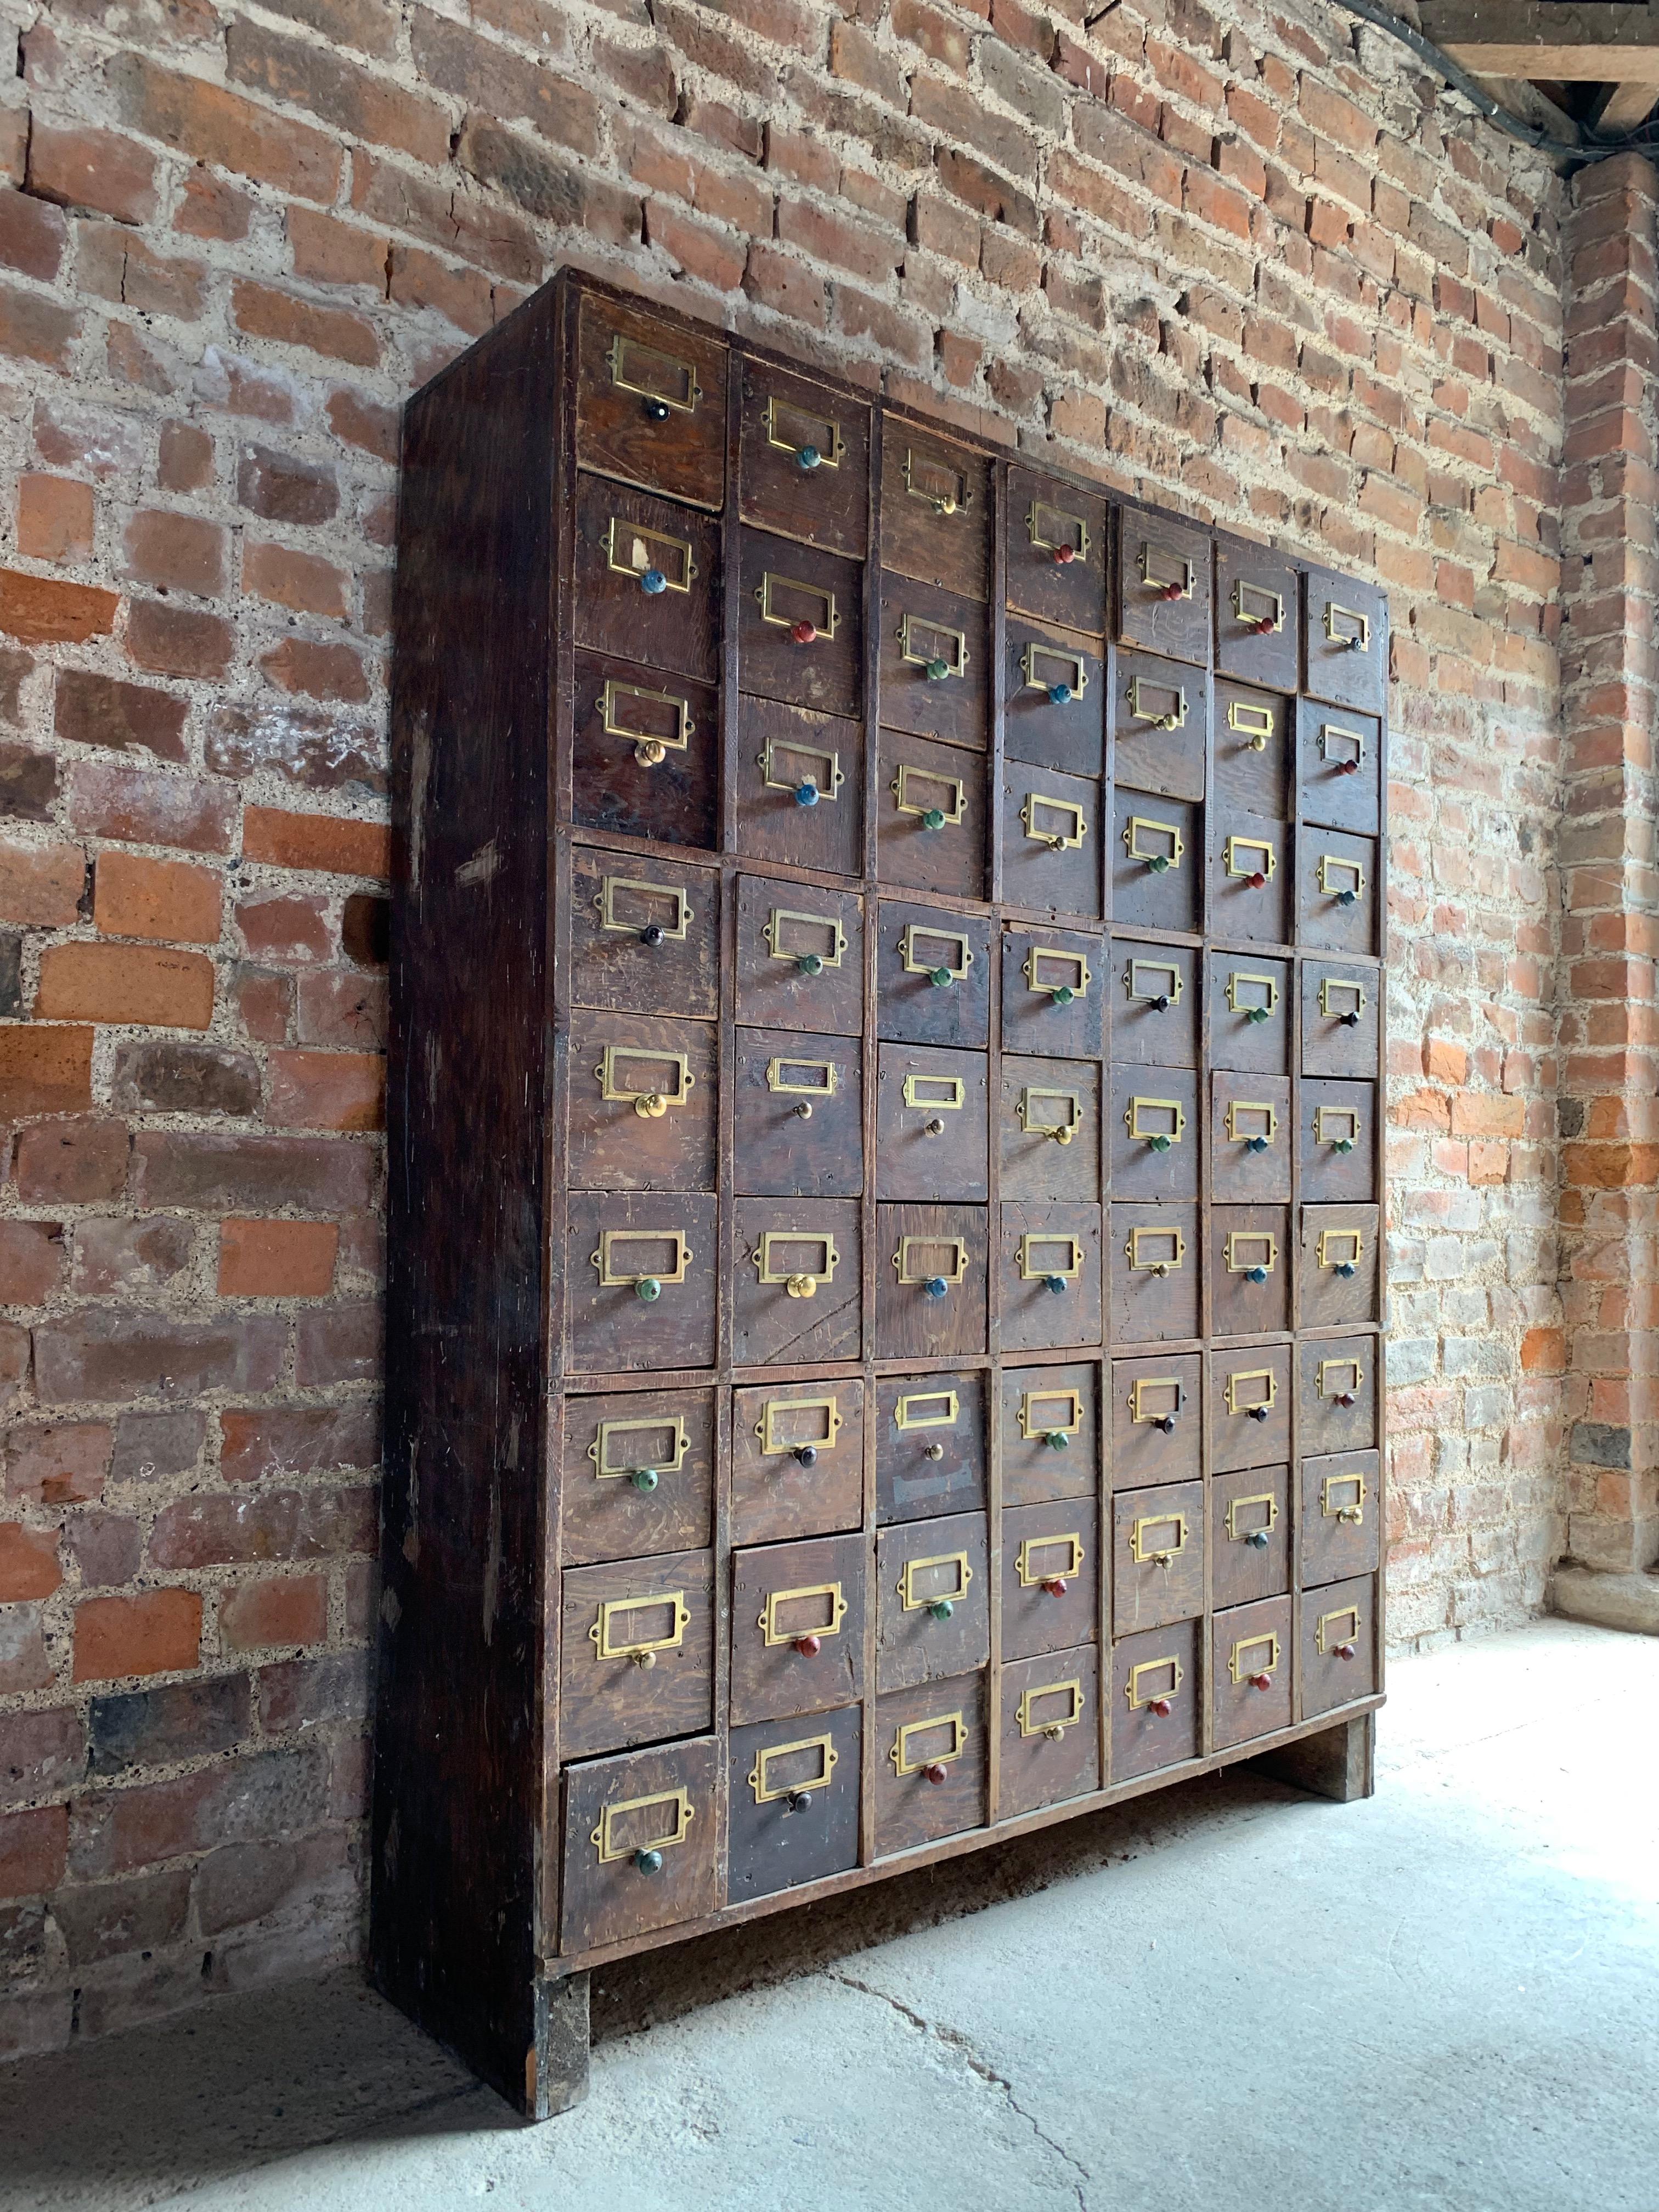 Mid-20th Century Haberdashery Chest of Drawers Industrial Loft Style Engineers Drawers circa 1940